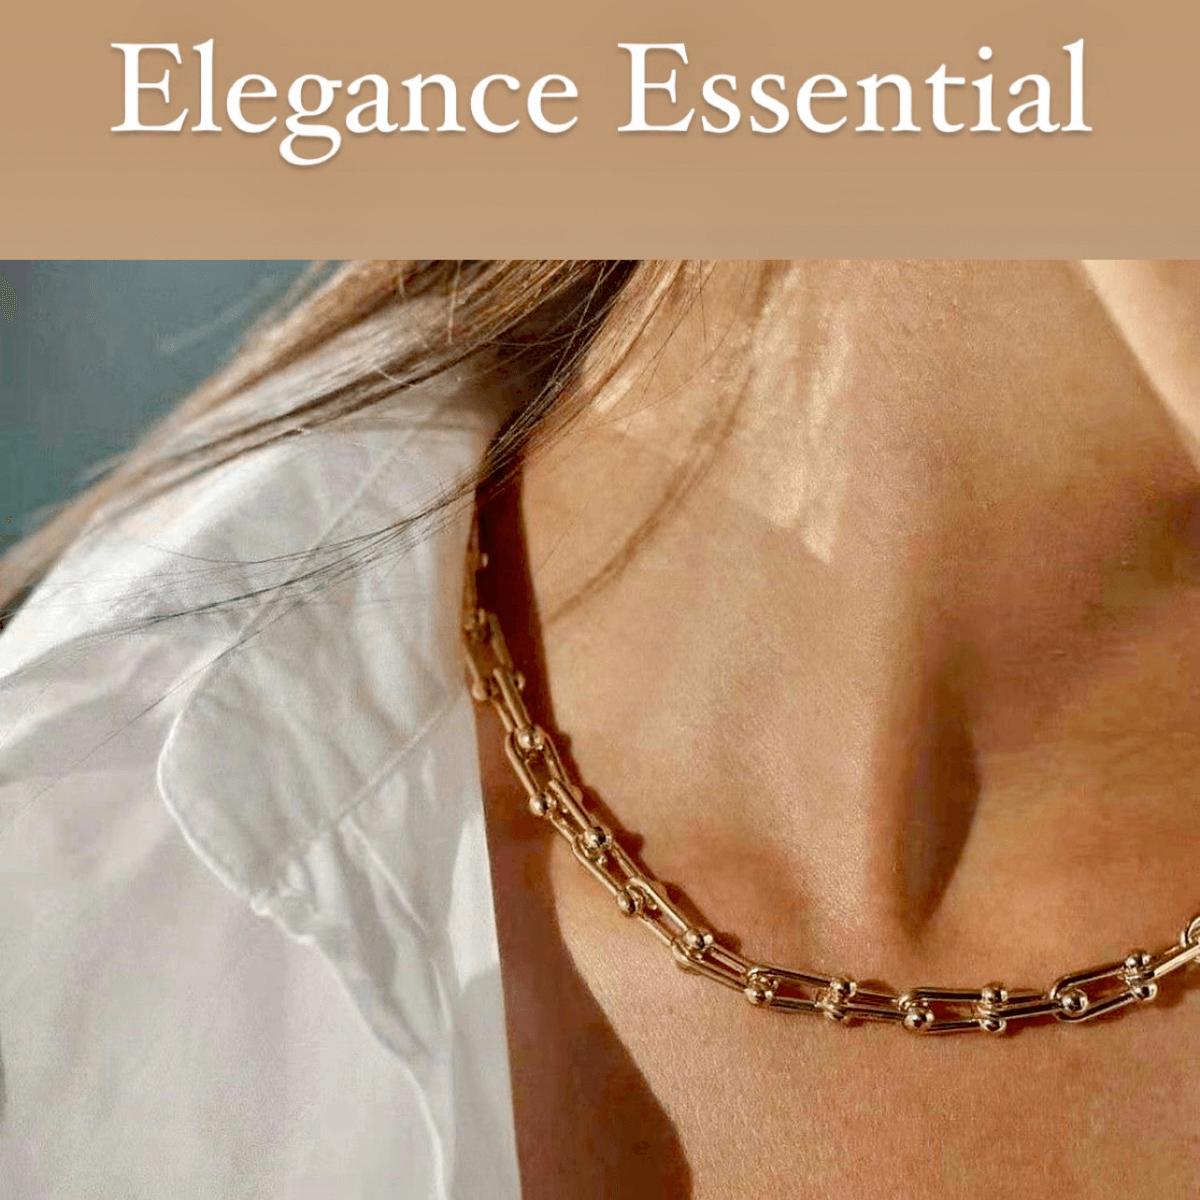 Essential” Gold Chains